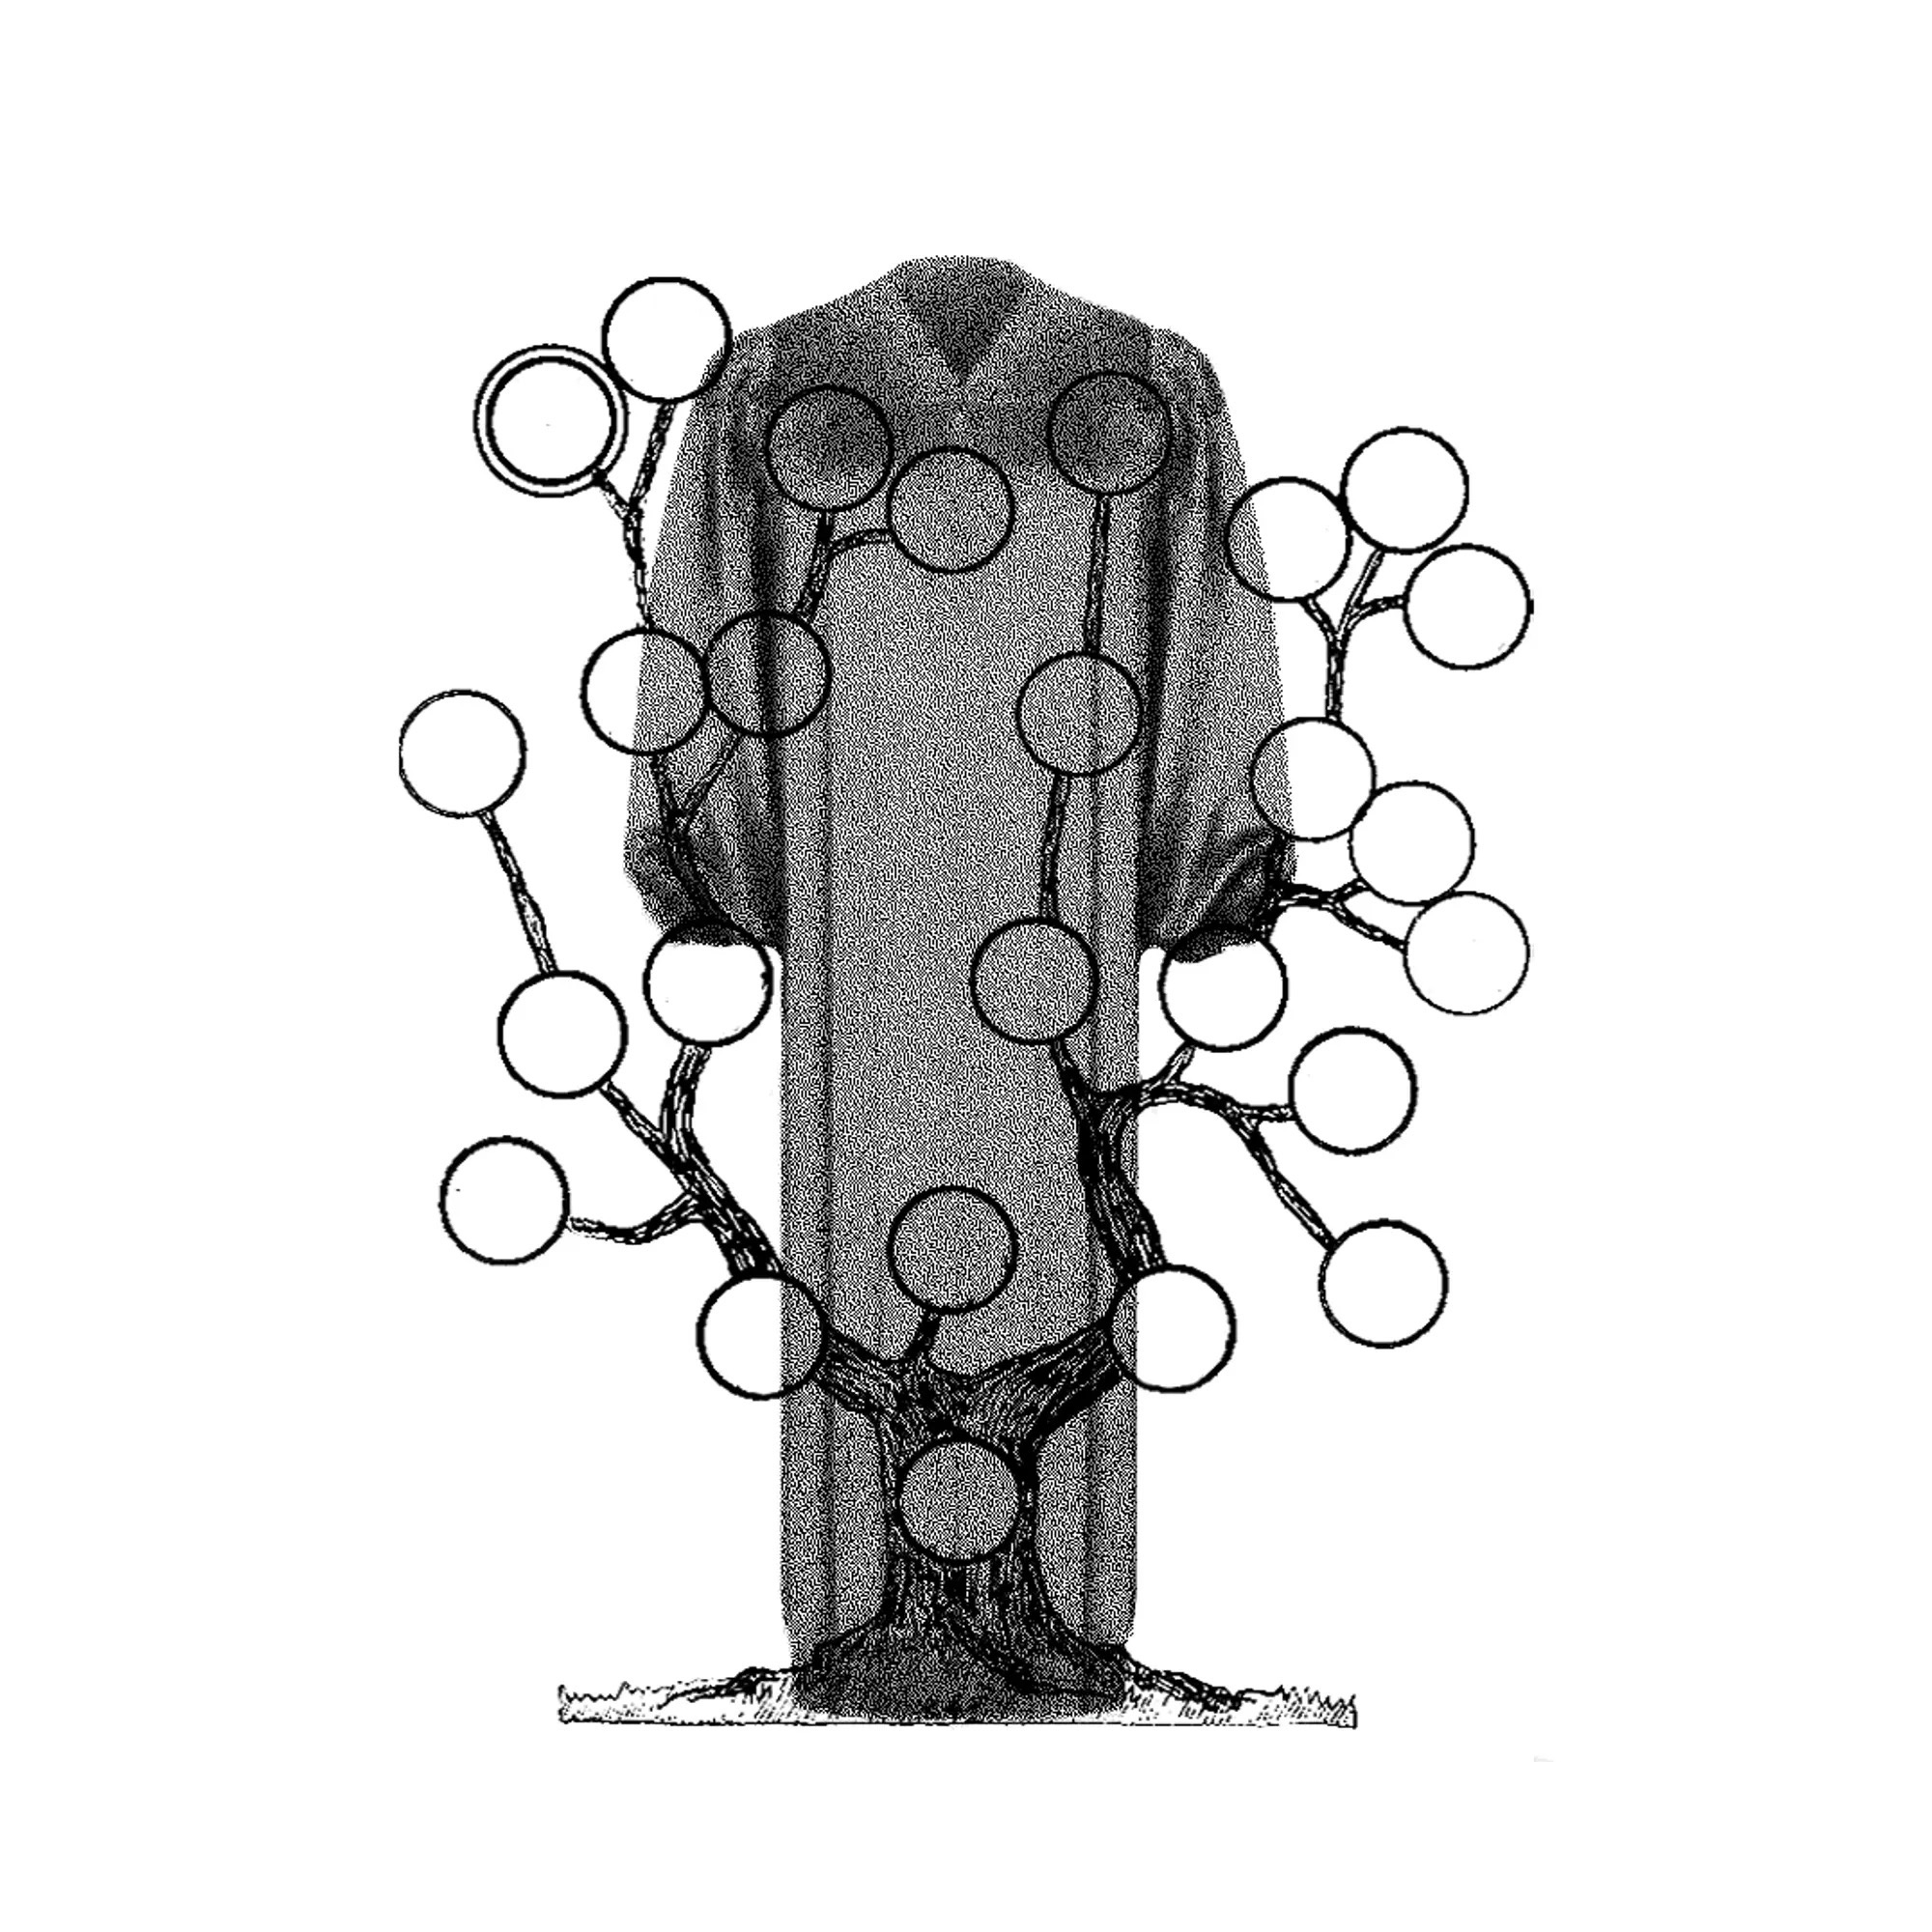 Illustration of a judges robe with a tree, credit Pro Publica